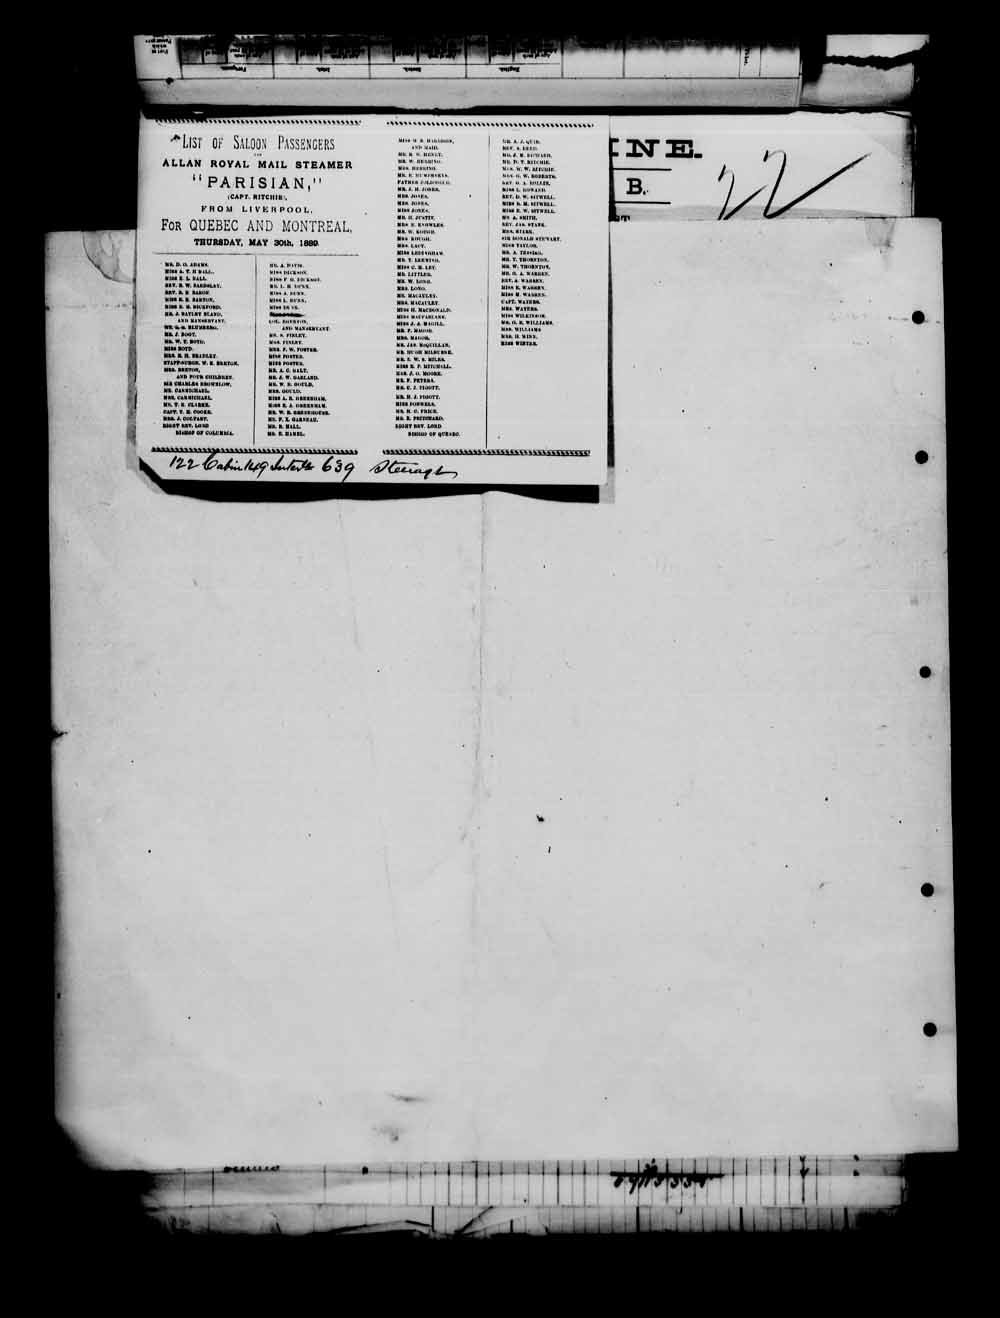 Digitized page of Passenger Lists for Image No.: e003549684